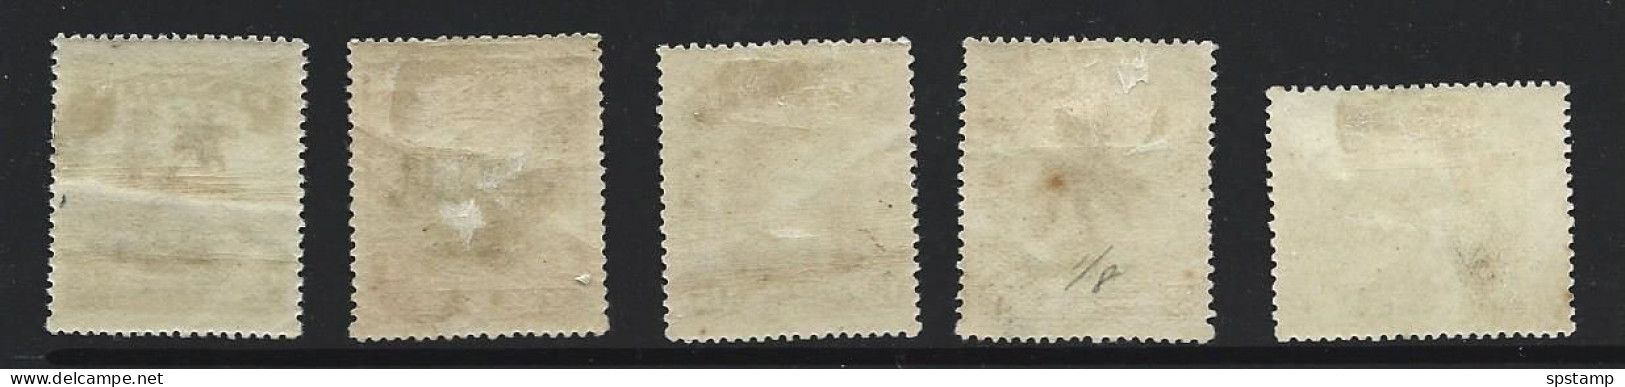 Penrhyn Island 1920 Scene Definitives Part Set Of 5 Attractive Mint , Some Blemishes - Penrhyn